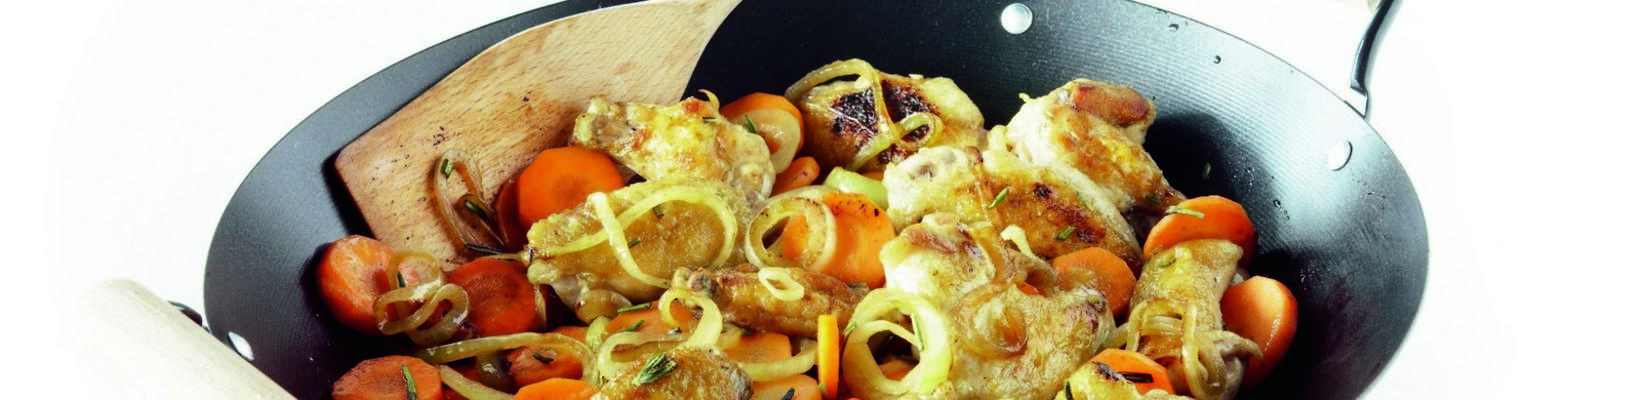 stir-fry platter with winter carrot and chicken